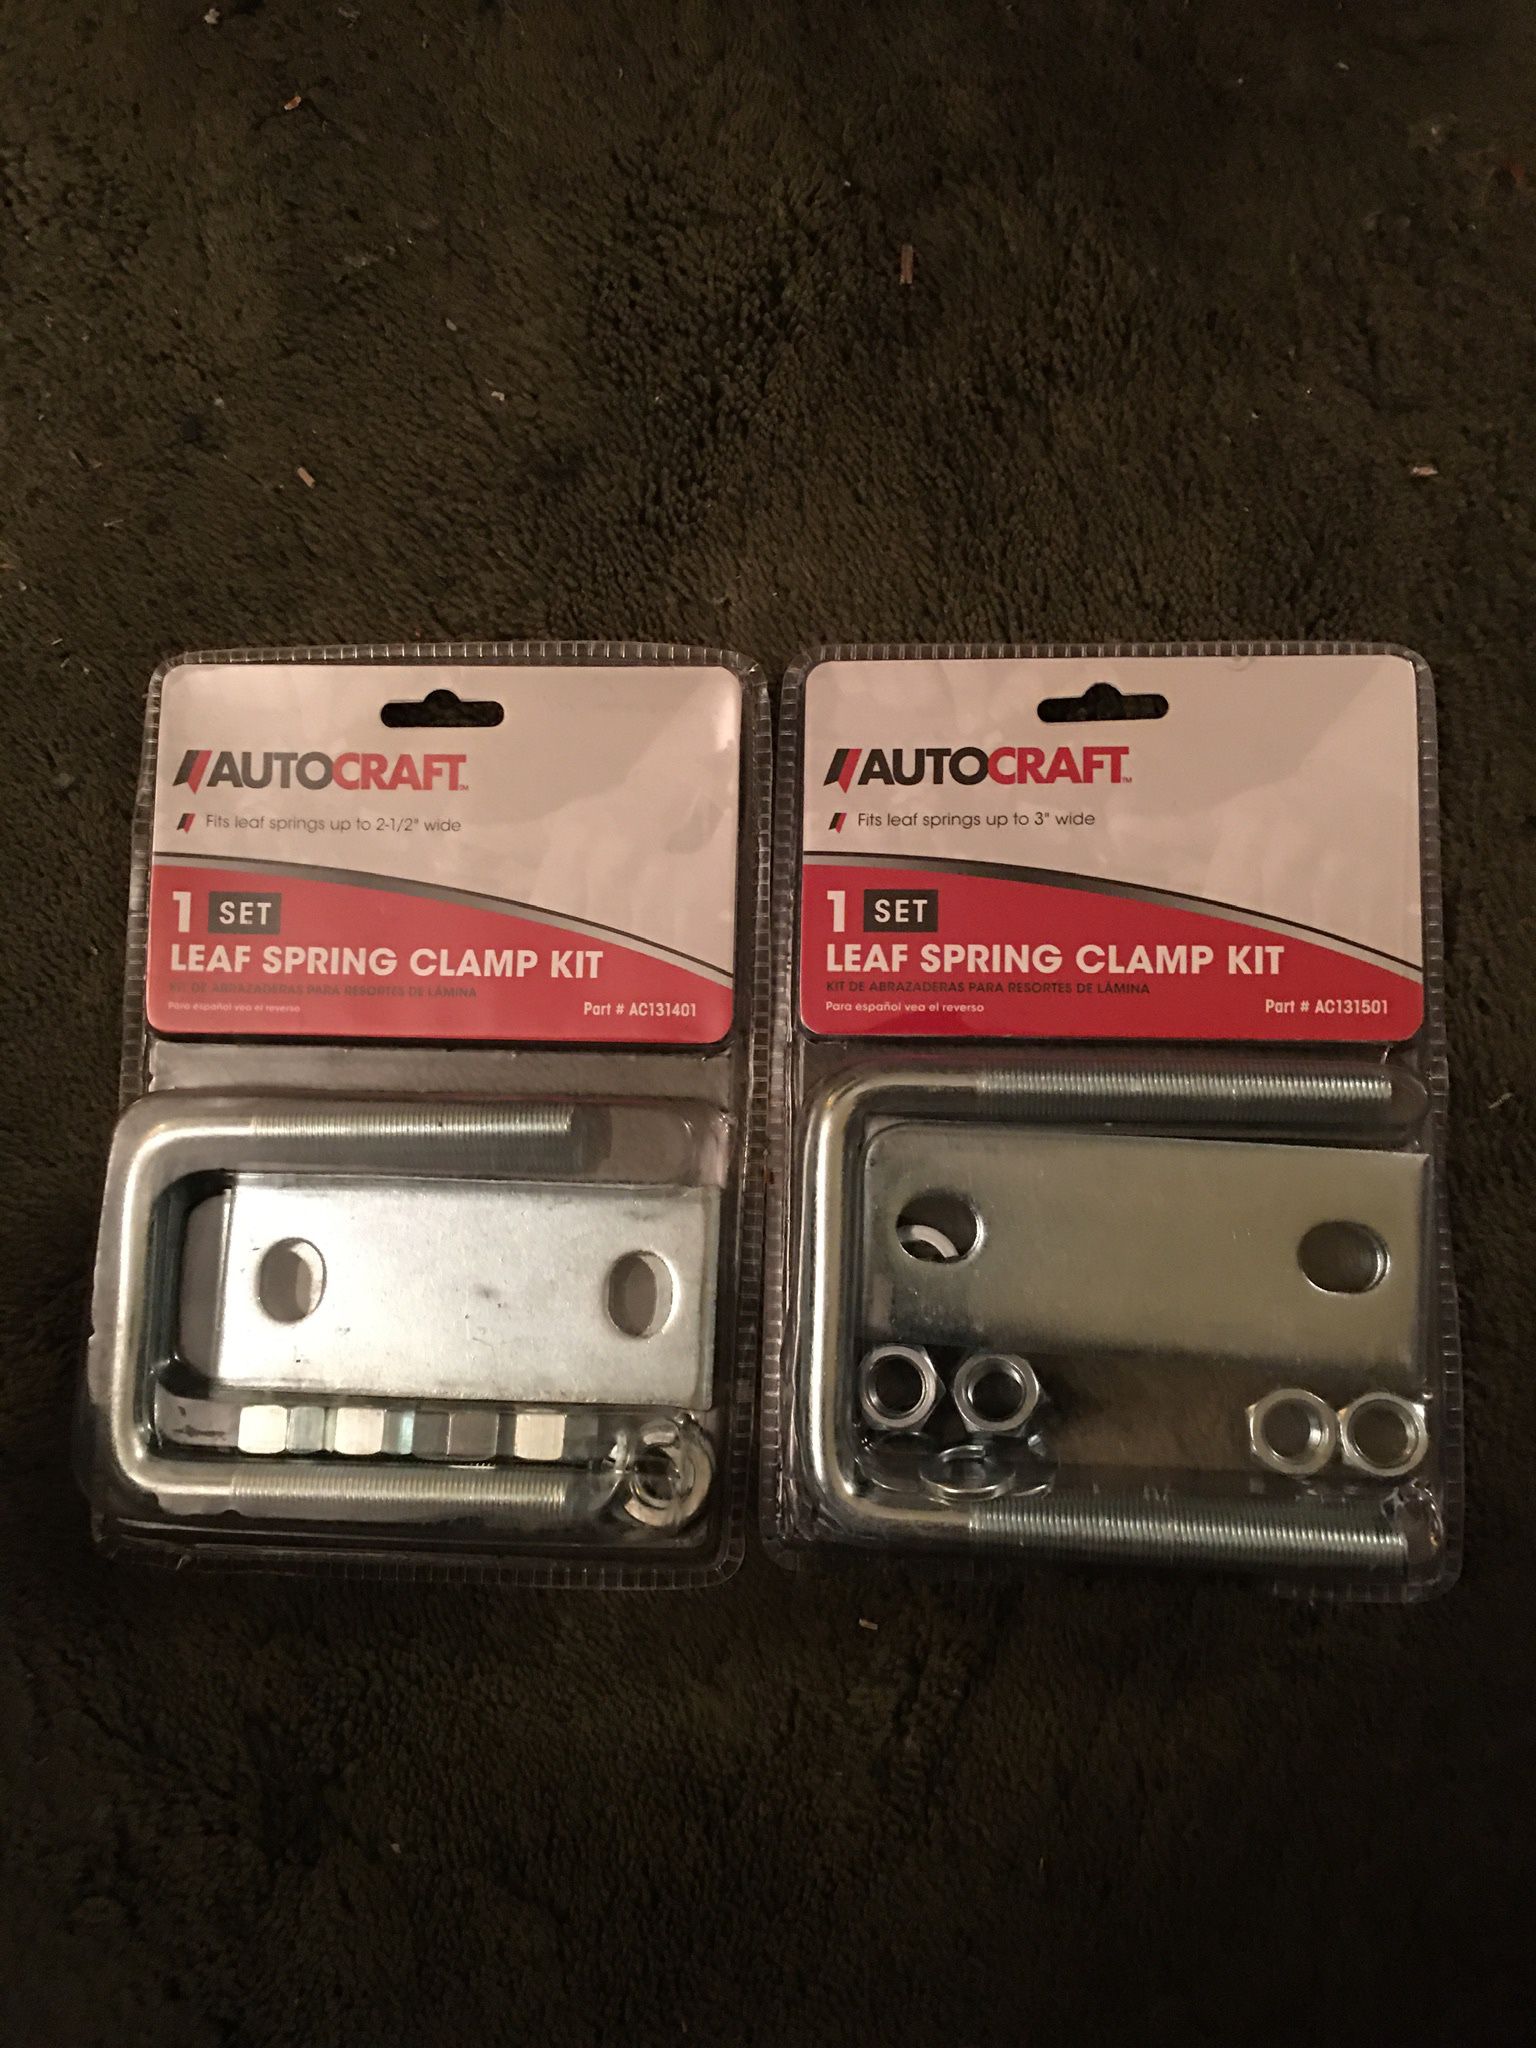 Brand New Never Used AUTOCRAFT Leafs Spring Clamp Kit 2-1/2”Inch Wide And 3”Inch Wide $20.00